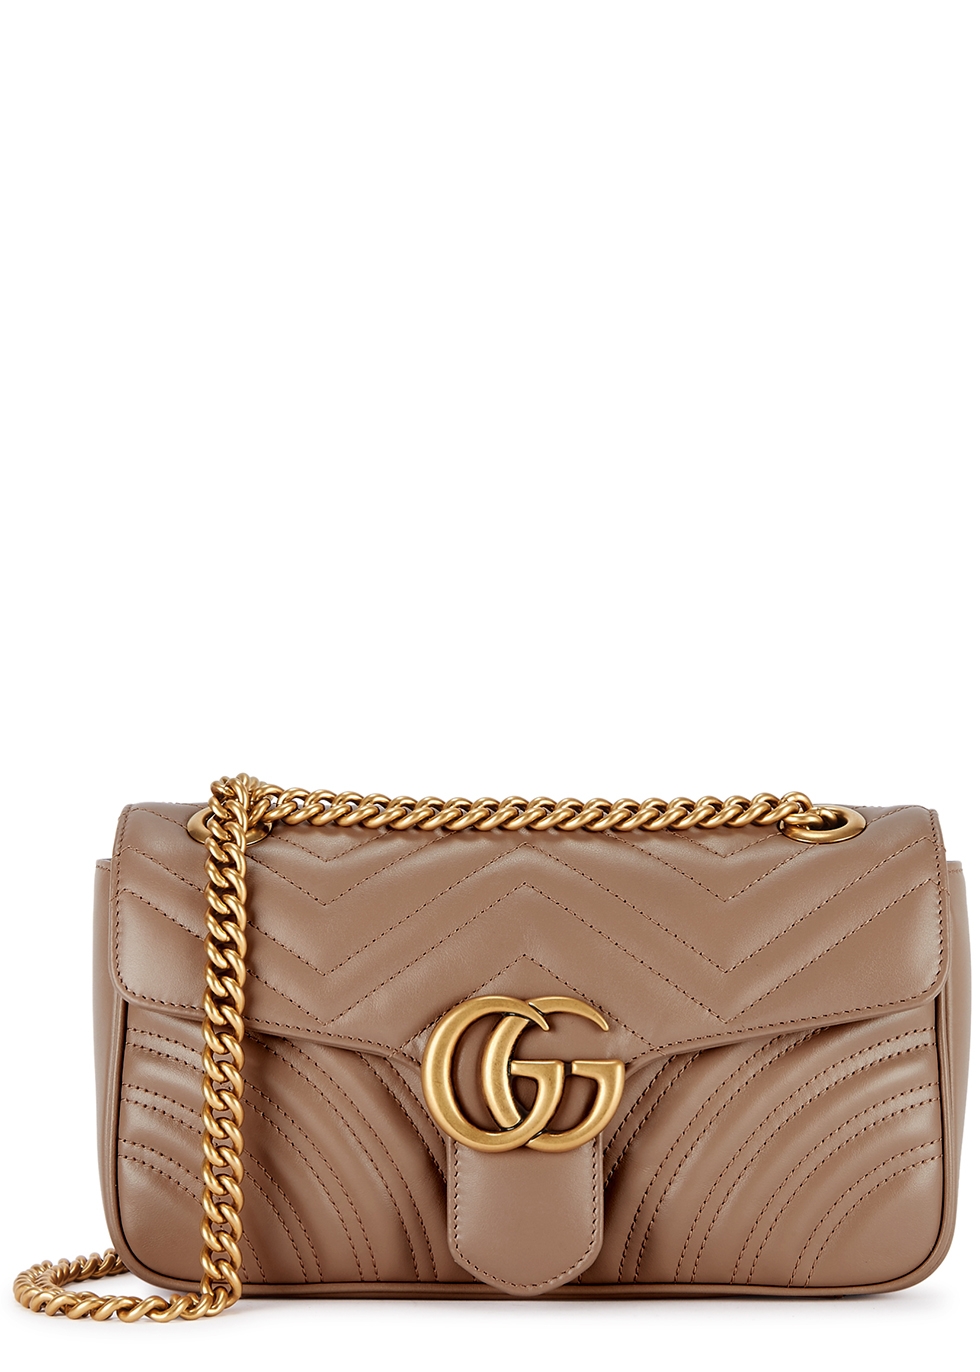 gg marmont small leather shoulder bag